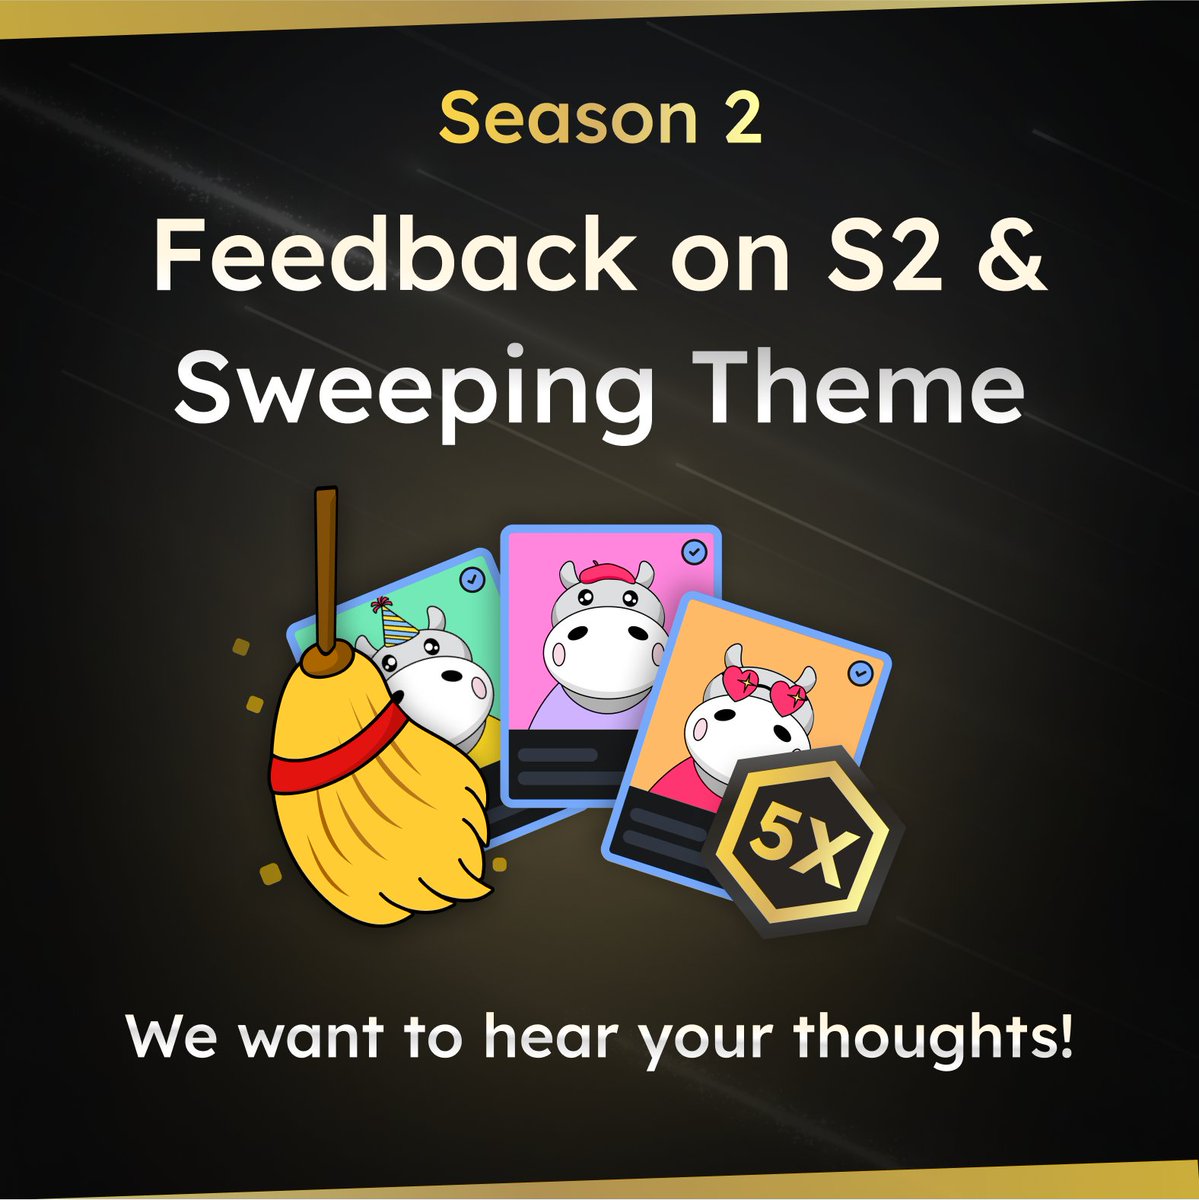 S2 bonuses for “Sweep” transactions have been live for over a week! 🔥 How are you liking this season’s theme? What theme do you want to see in the future? What “Sweep” are you saving up ADA for? 🧹 We wanna hear your thoughts below 👇